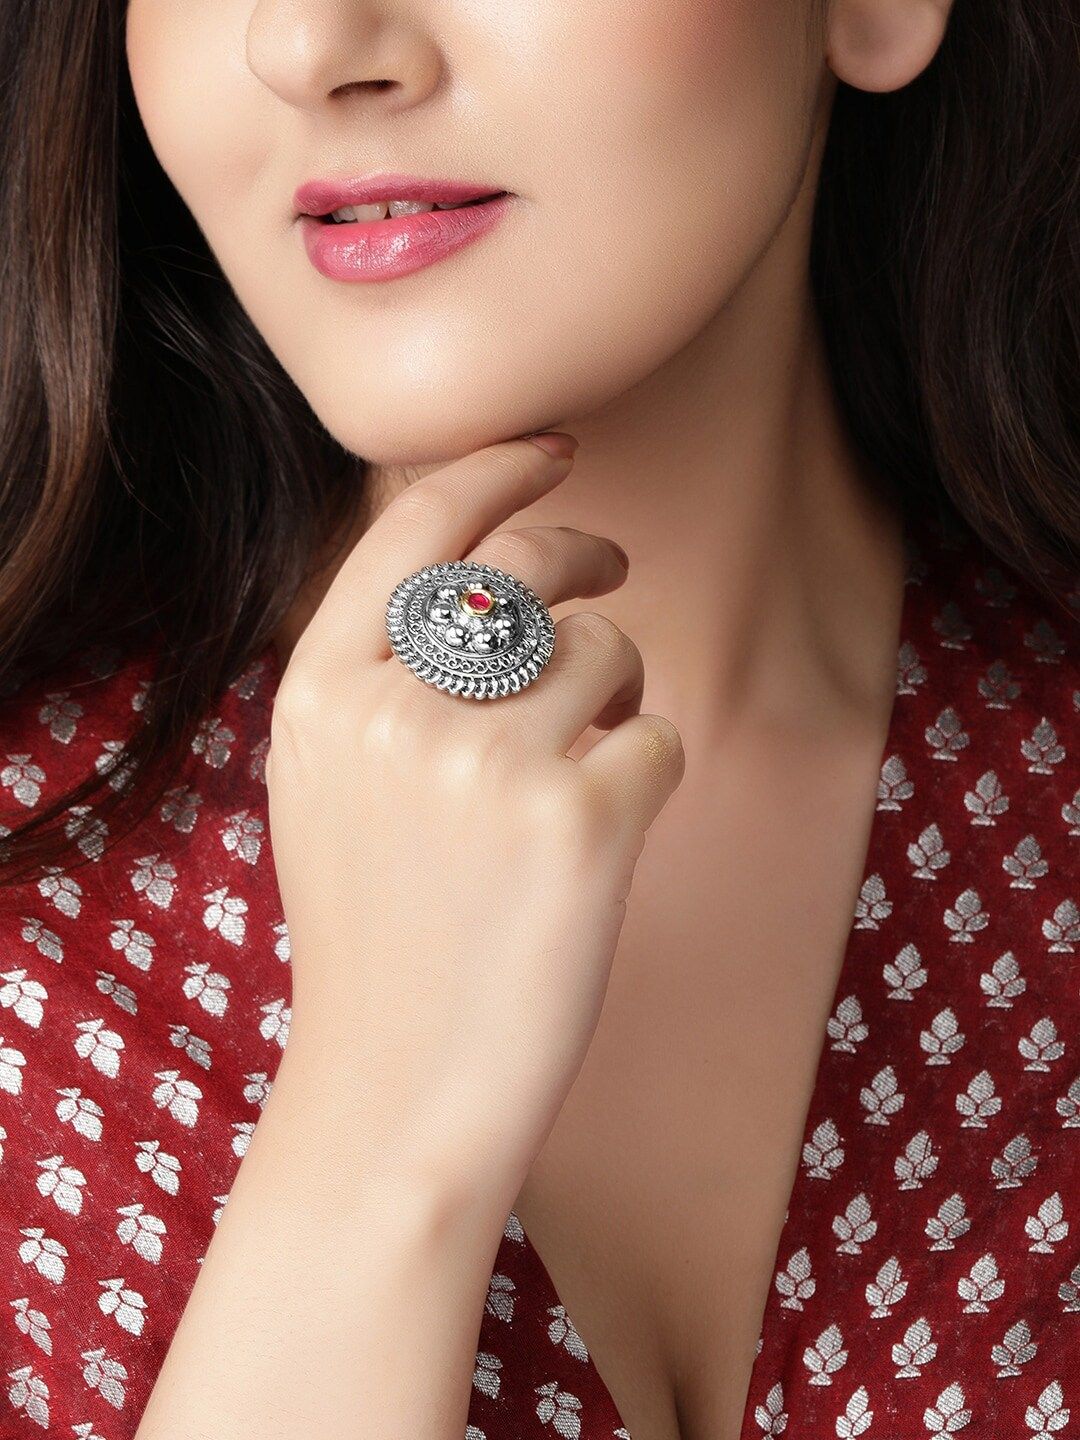 Rubans Oxidized Silver-Toned Red Stone-Studded Adjustable Finger Ring Price in India